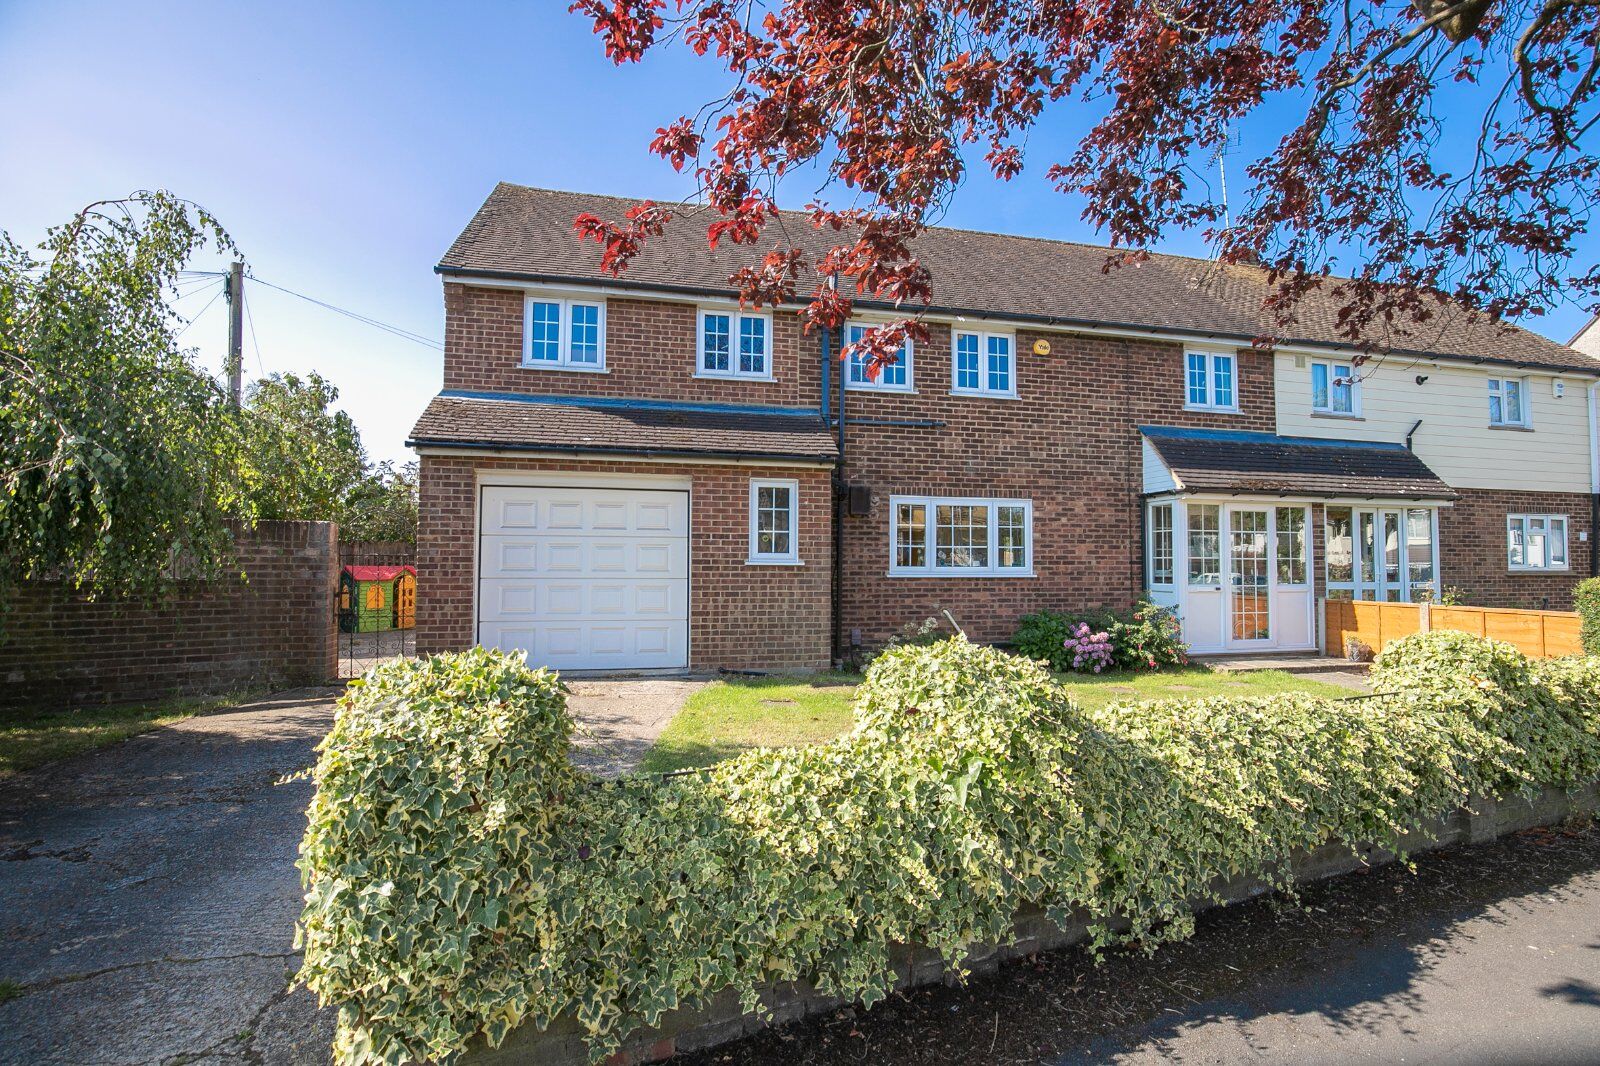 4 bedroom semi detached house for sale Coopers Close, Chigwell, IG7, main image